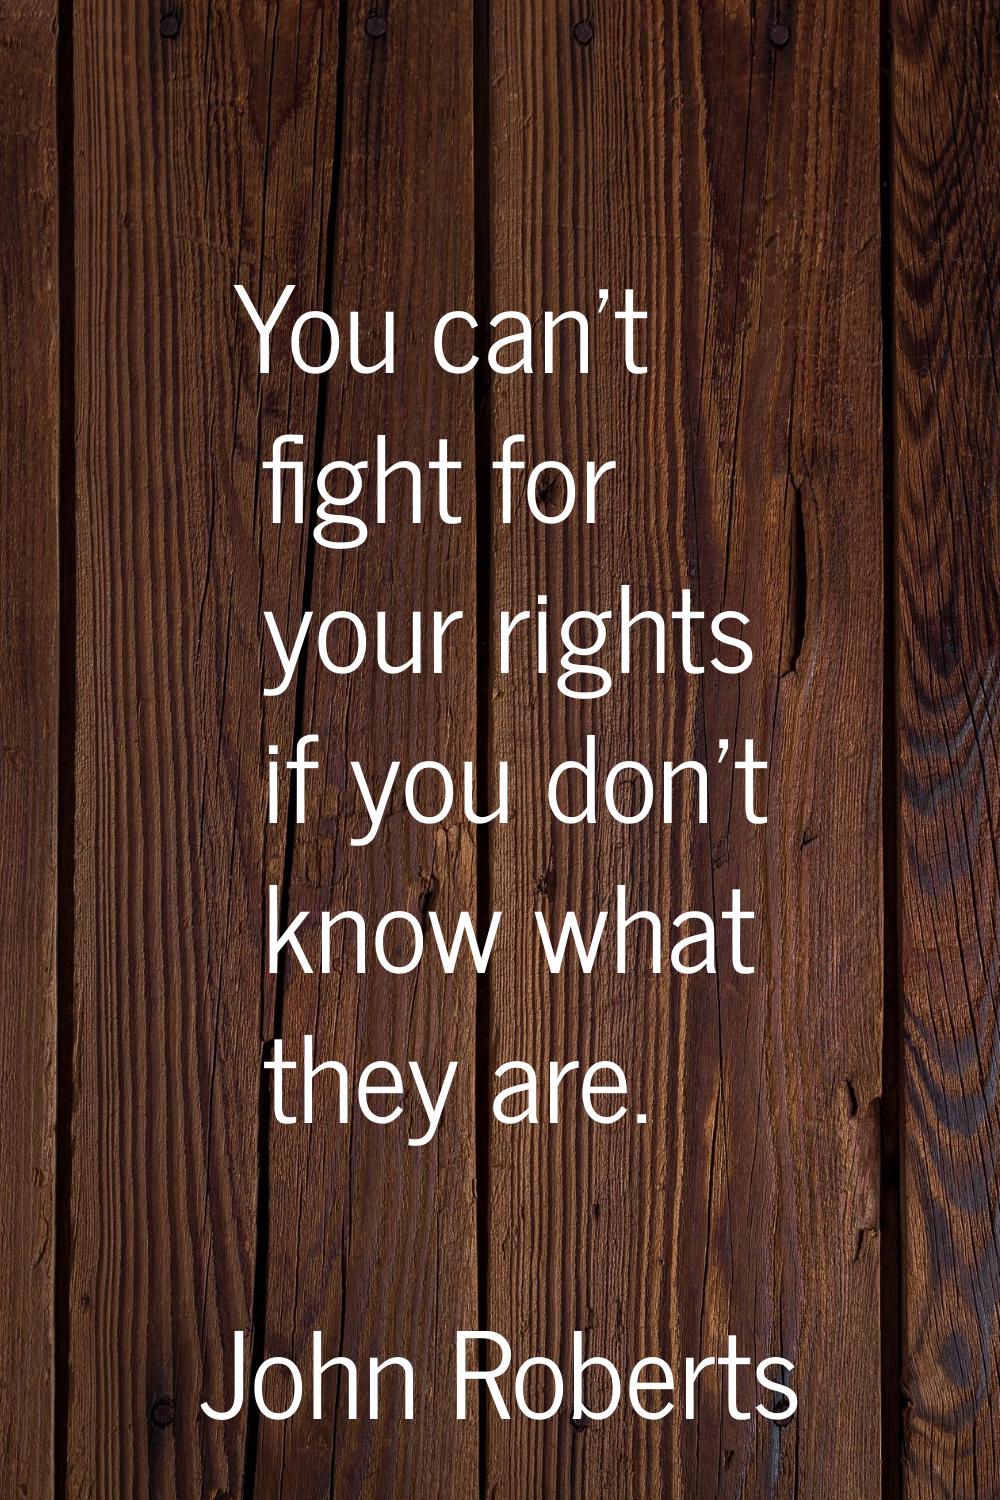 You can't fight for your rights if you don't know what they are.